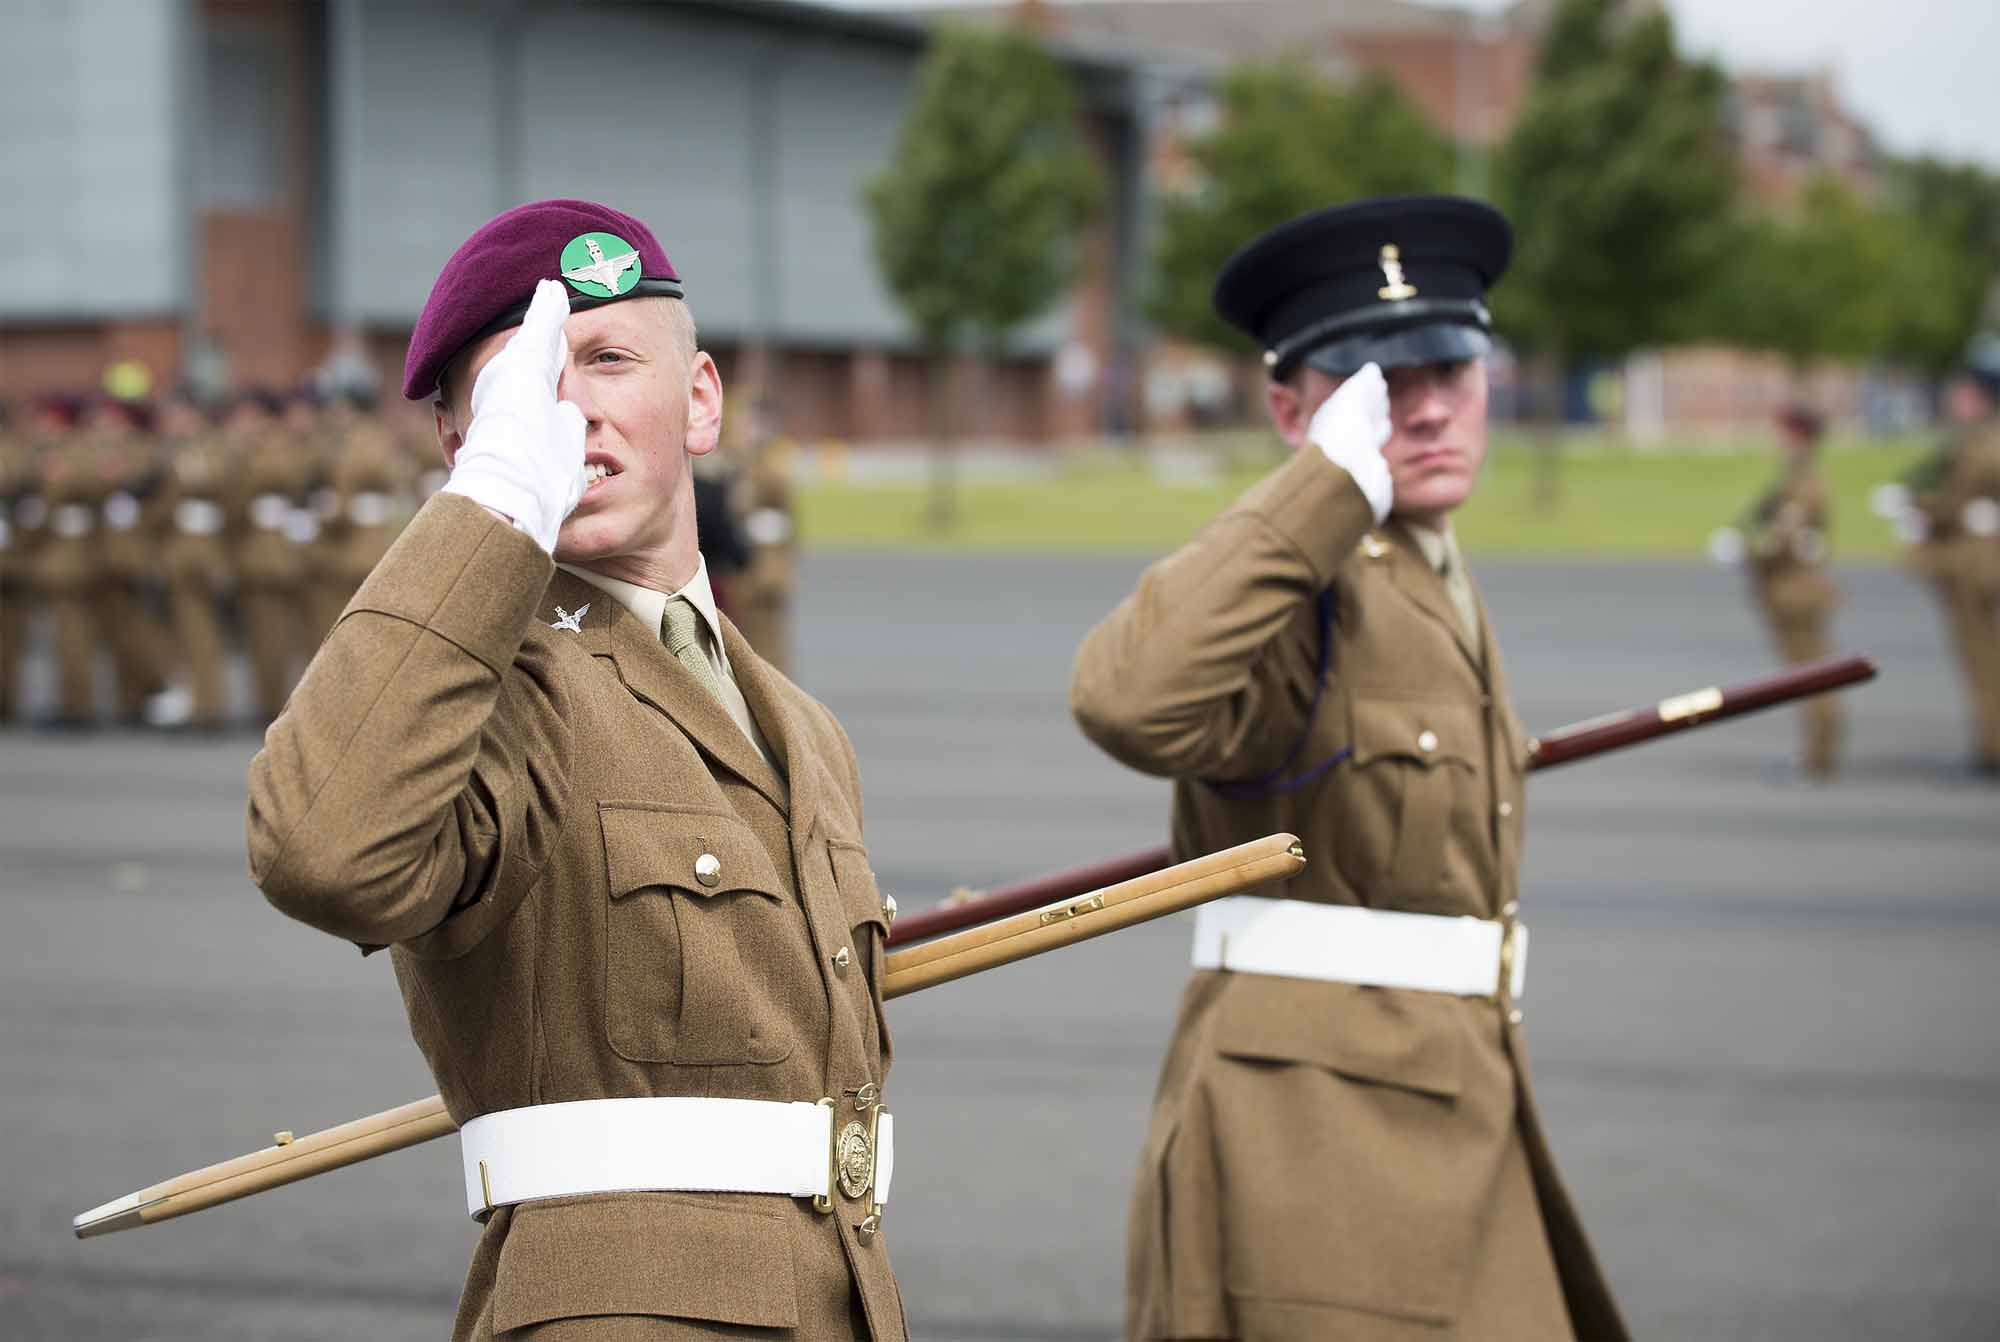 Pictured:Junior Soldiers Wilson (left) and Frame saluting the inspecting officer. More than 600 teenagers from the Army Foundation College marched on their way to a new career when they graduated from the military training establishment in Harrogate, North Yorkshire. The college in Penny Pot Lane, Harrogate runs two types of course – a 40-week long course and a shorter 20-week course to train 16-17 year olds for a wide variety of Army careers. NOTE TO DESKS:  MoD release authorised handout images.  All images remain Crown Copyright 2016.  Photo credit to read -Sgt Jamie Peters RLC (Phot) Email: jamiepeters@mediaops.army.mod.uk richardwatt@mediaops.army.mod.uk shanewilkinson@mediaops.army.mod.uk Richard Watt - 07836 515306 Shane Wilkinson - 07901 590723